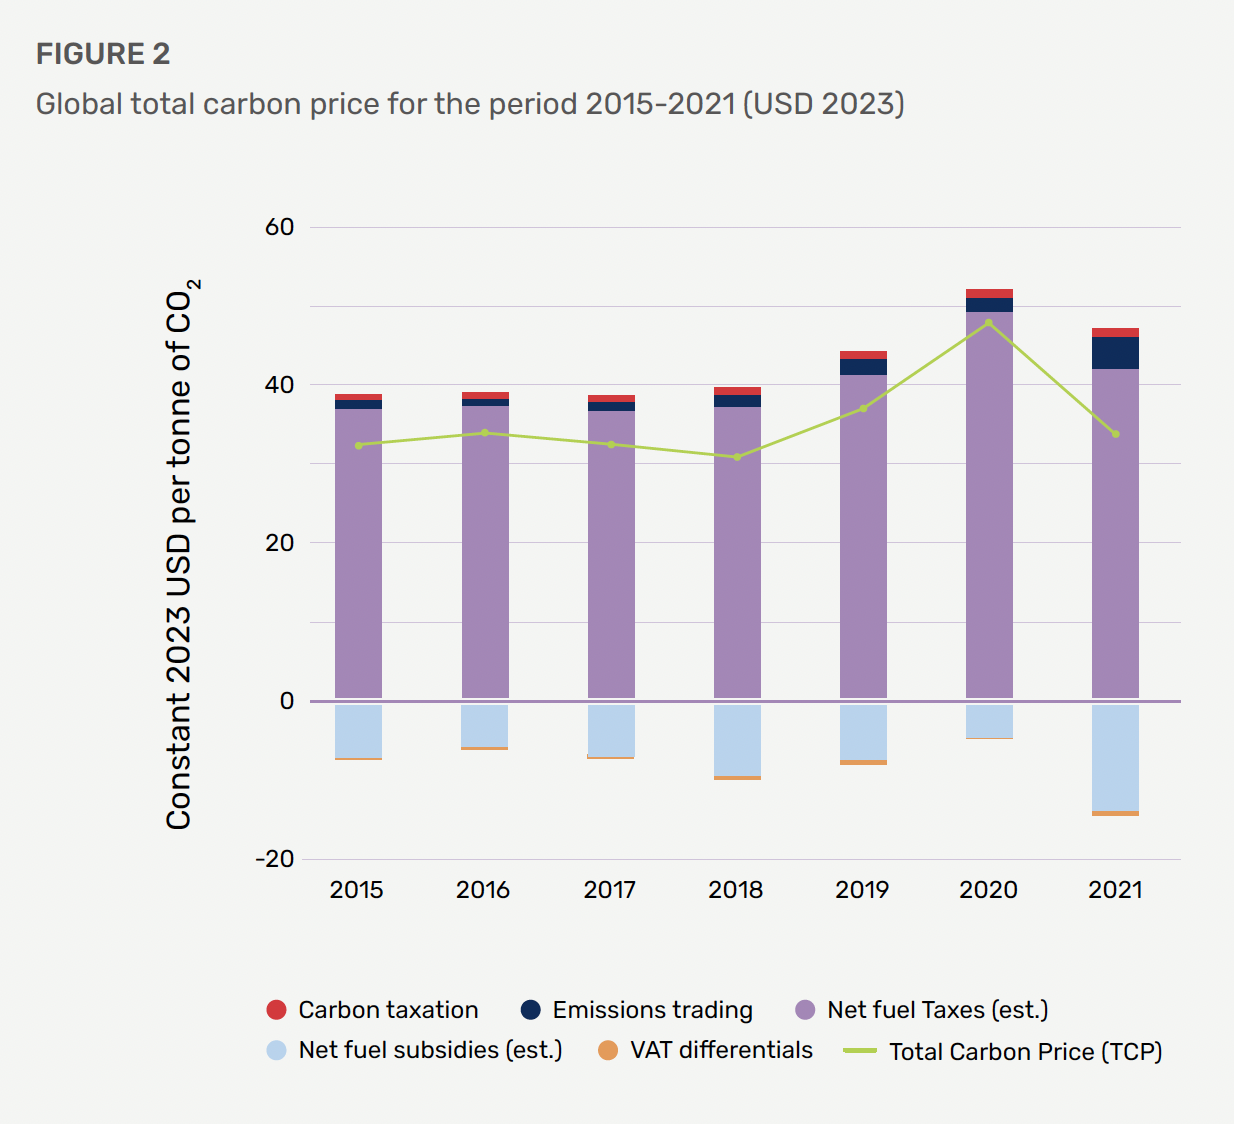 Global total carbon price for the period 2015-2021 (USD 2023